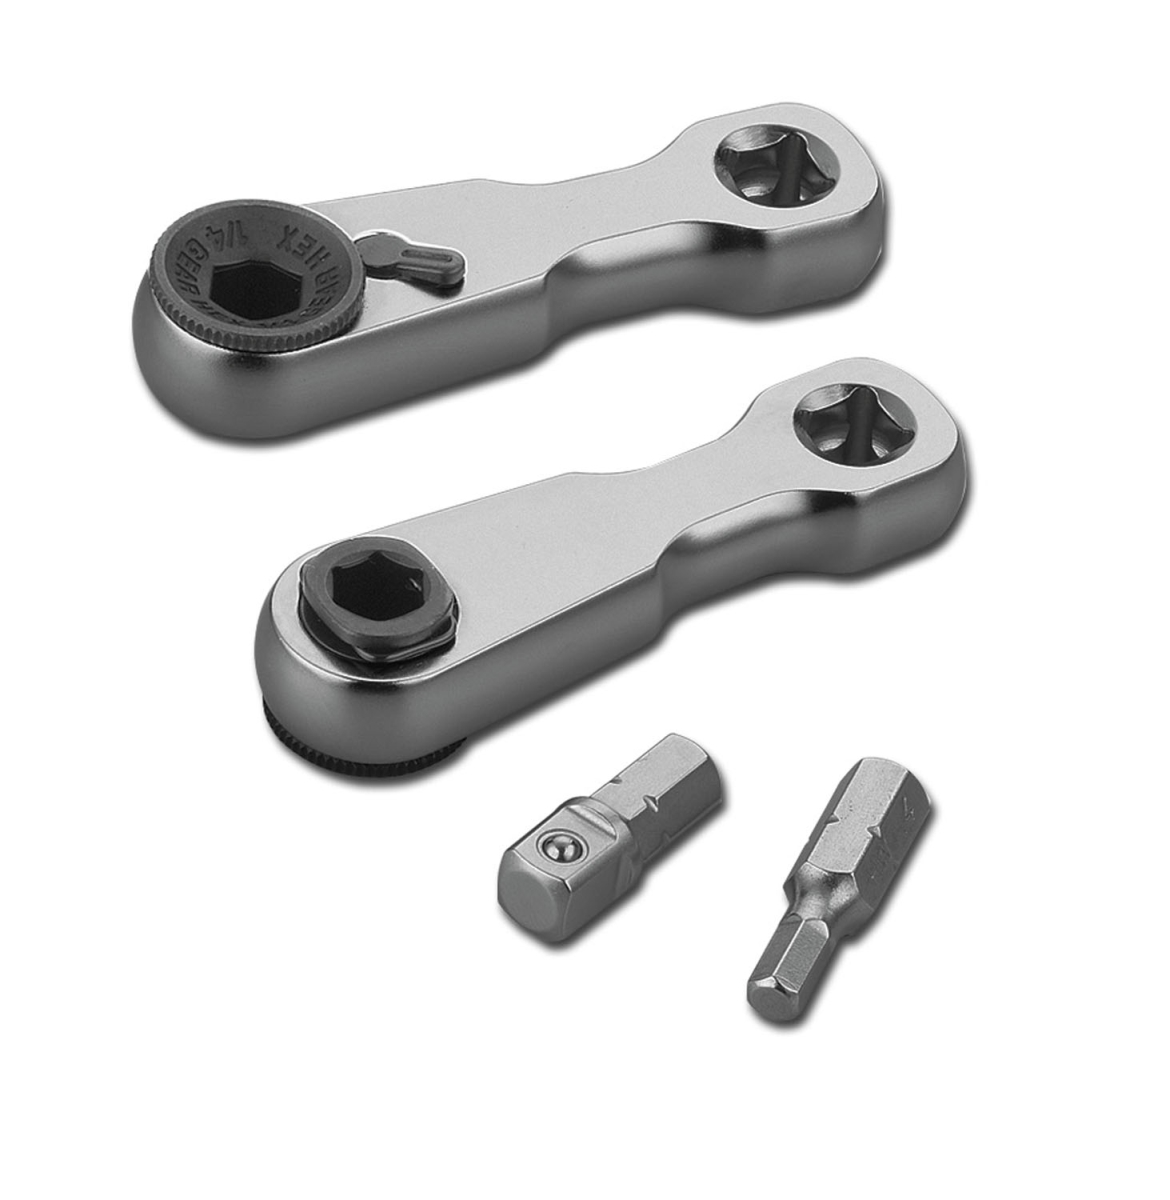 Vim-dd2 2 In. X 0.25 In. Dual Drive Ratchet Wrench